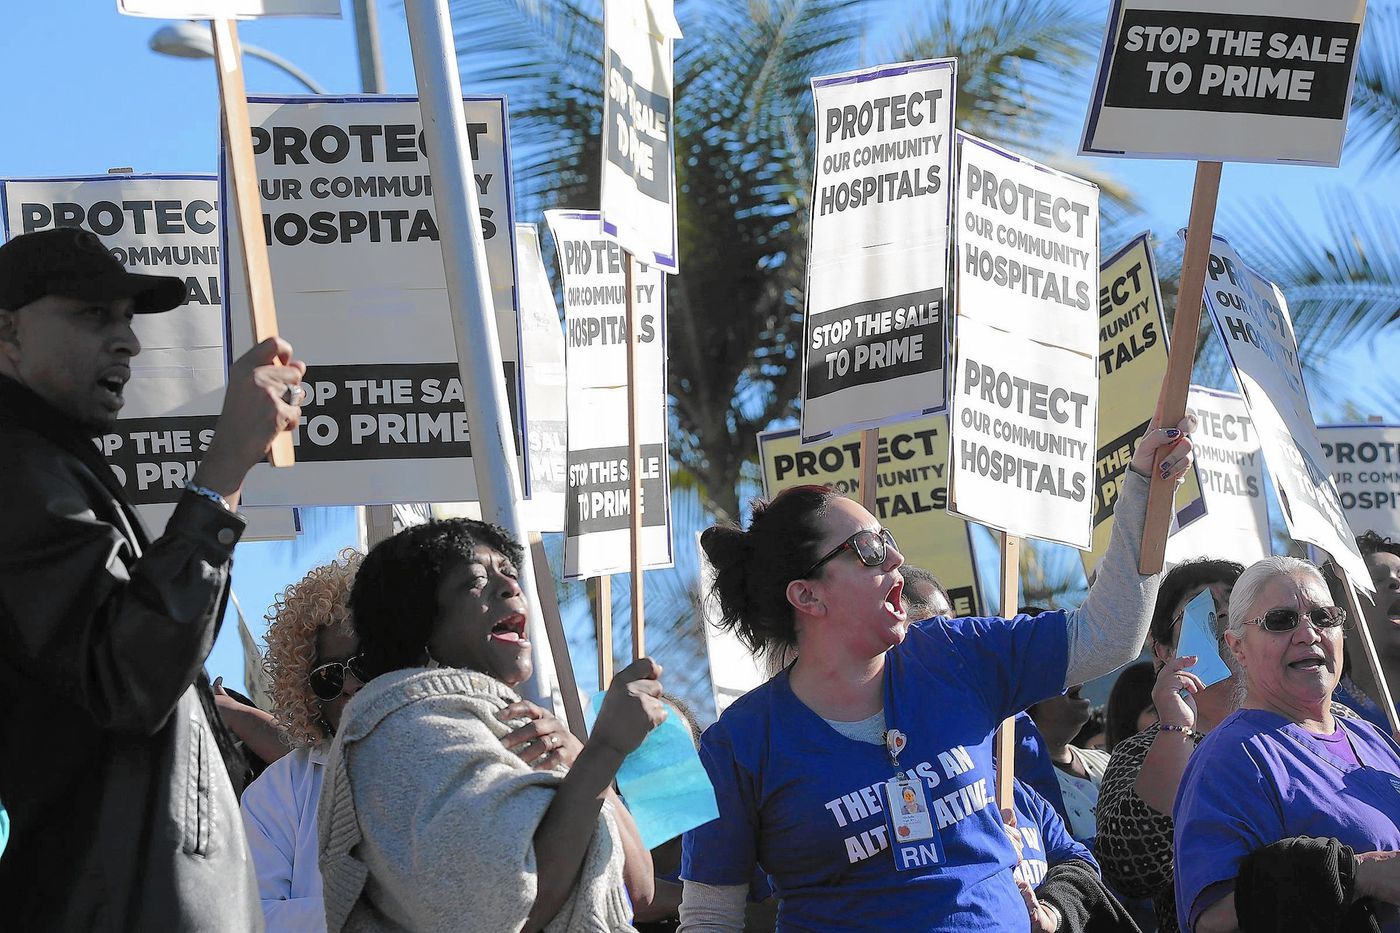 Protesters opposed to the sale of community hospitals run by the Catholic order Daughters of Charity to Prime Healthcare demonstrate outside a hearing held by the California attorney Kamala Harris. (Photo: Los Angeles Times) (RoseAnn DeMoro)